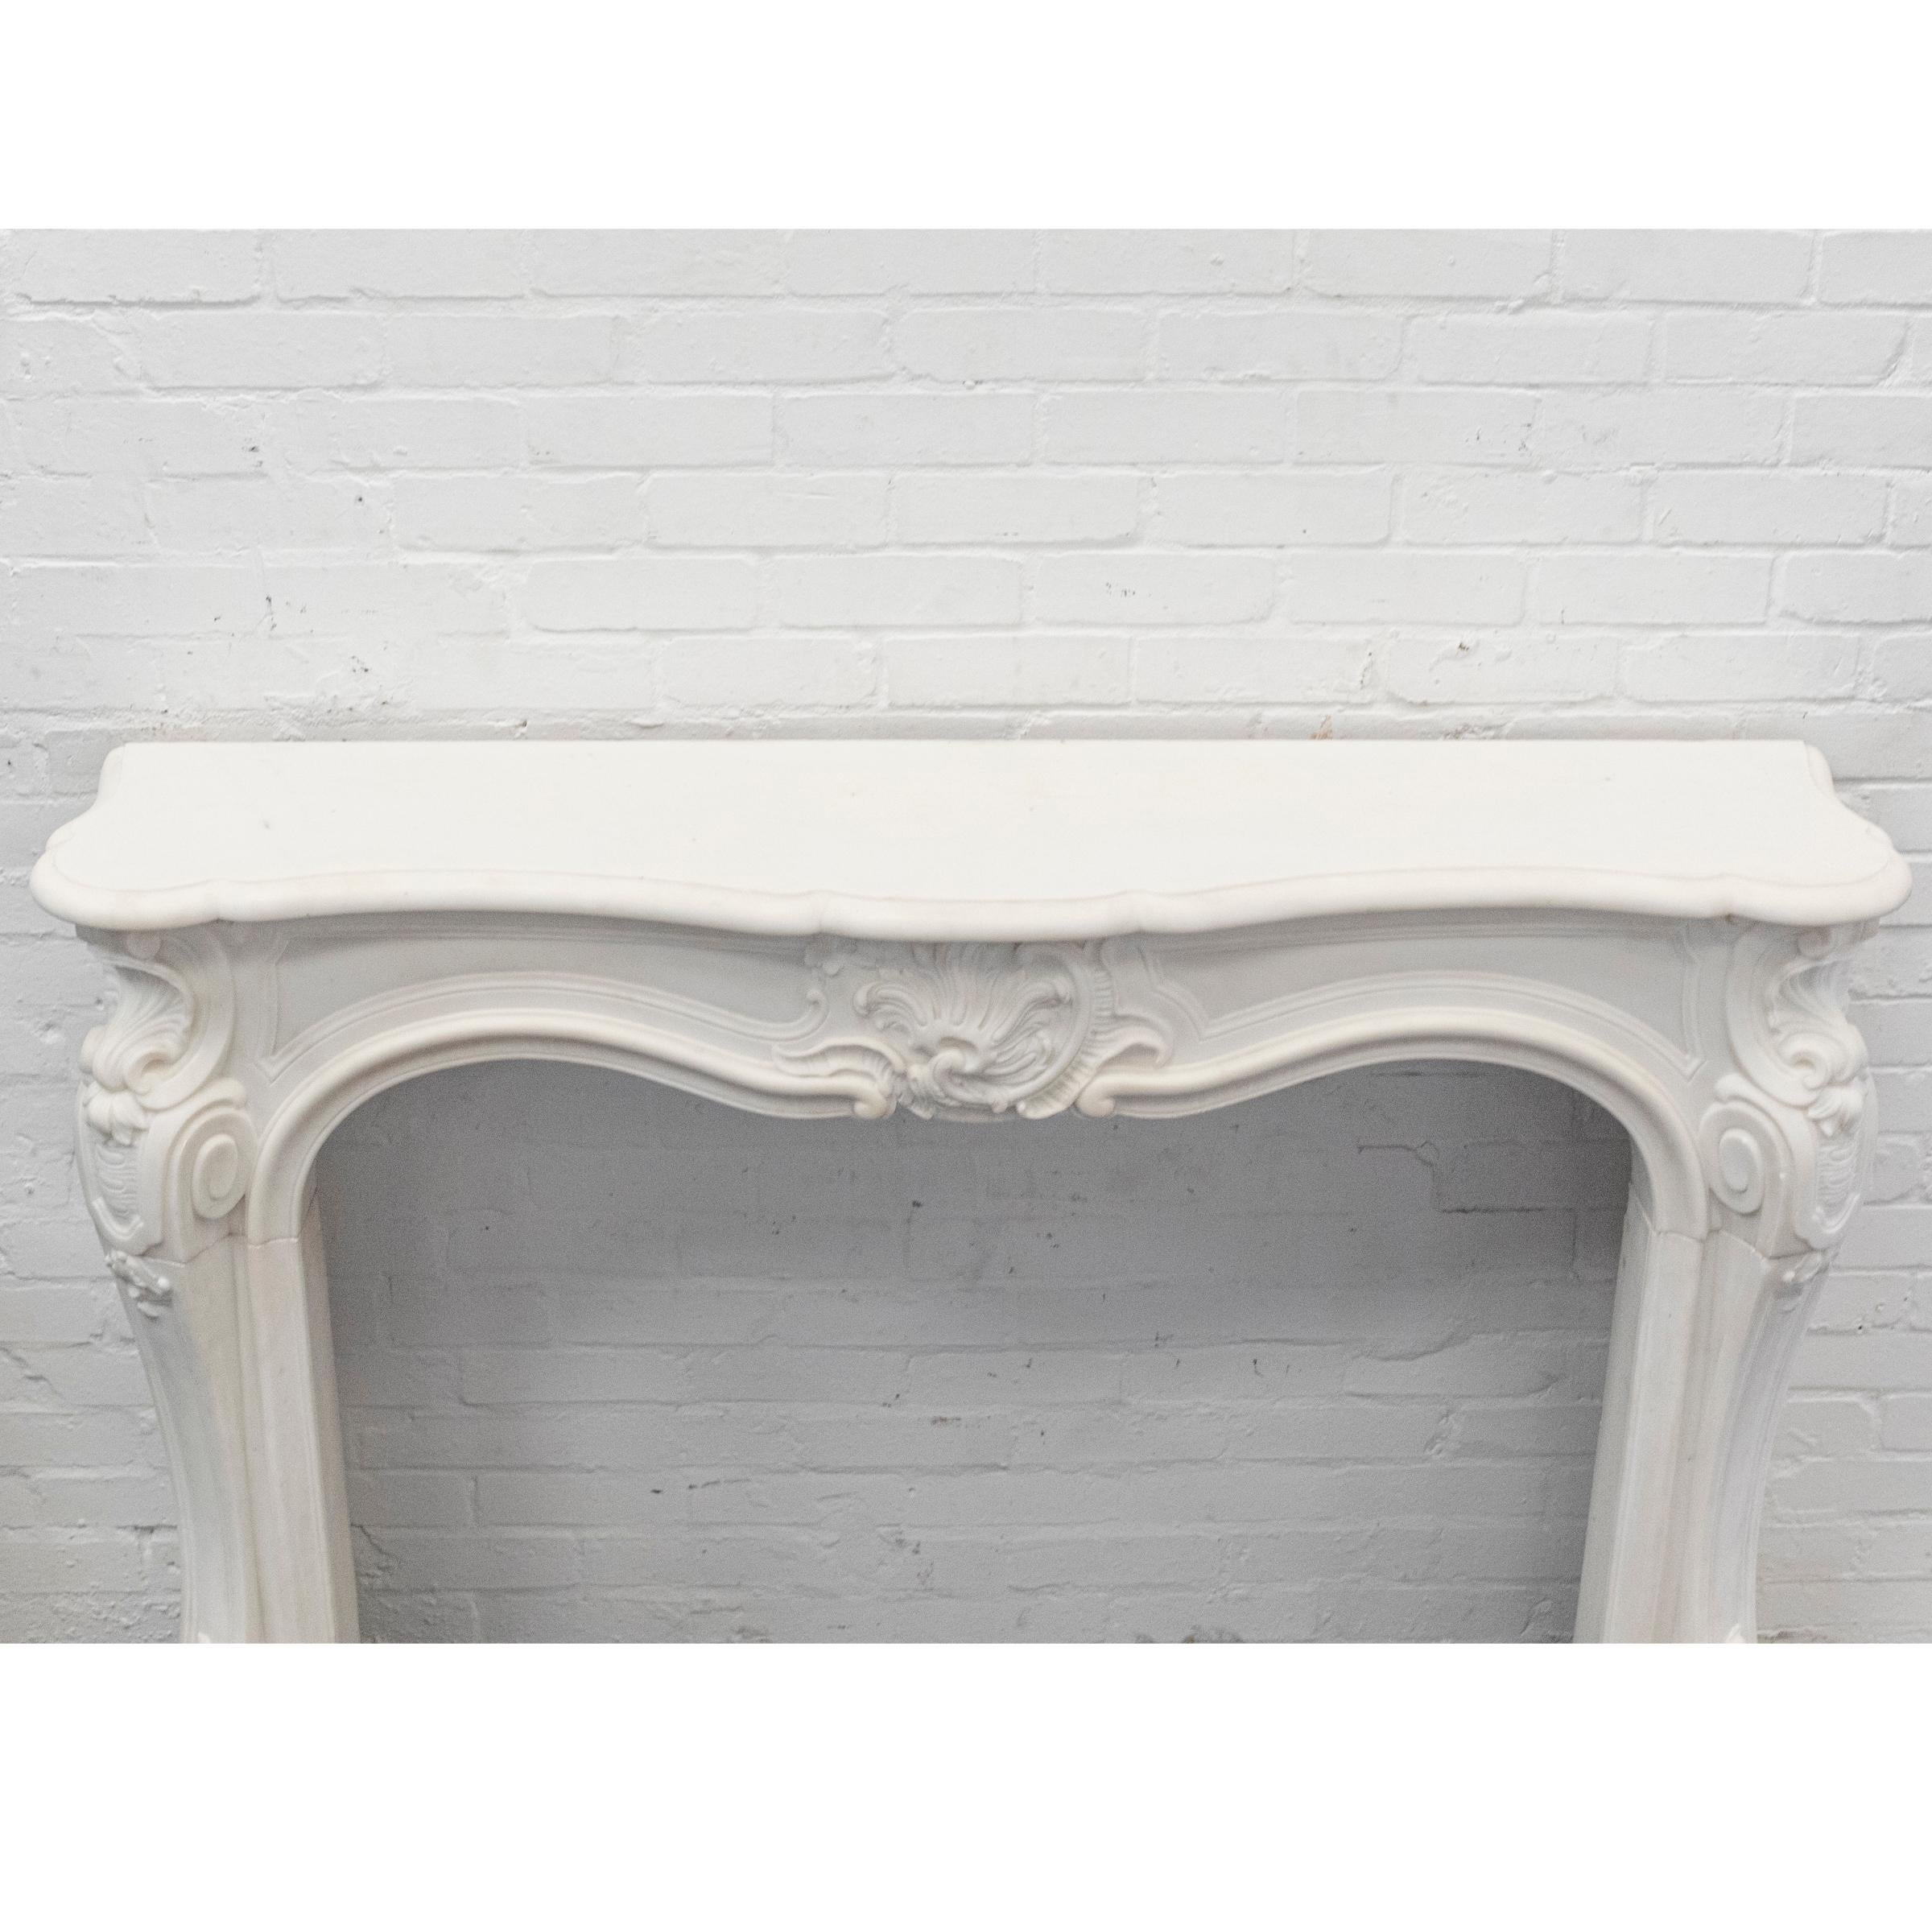 Antique 19th Century Louis XV style French Marble Fireplace For Sale 4